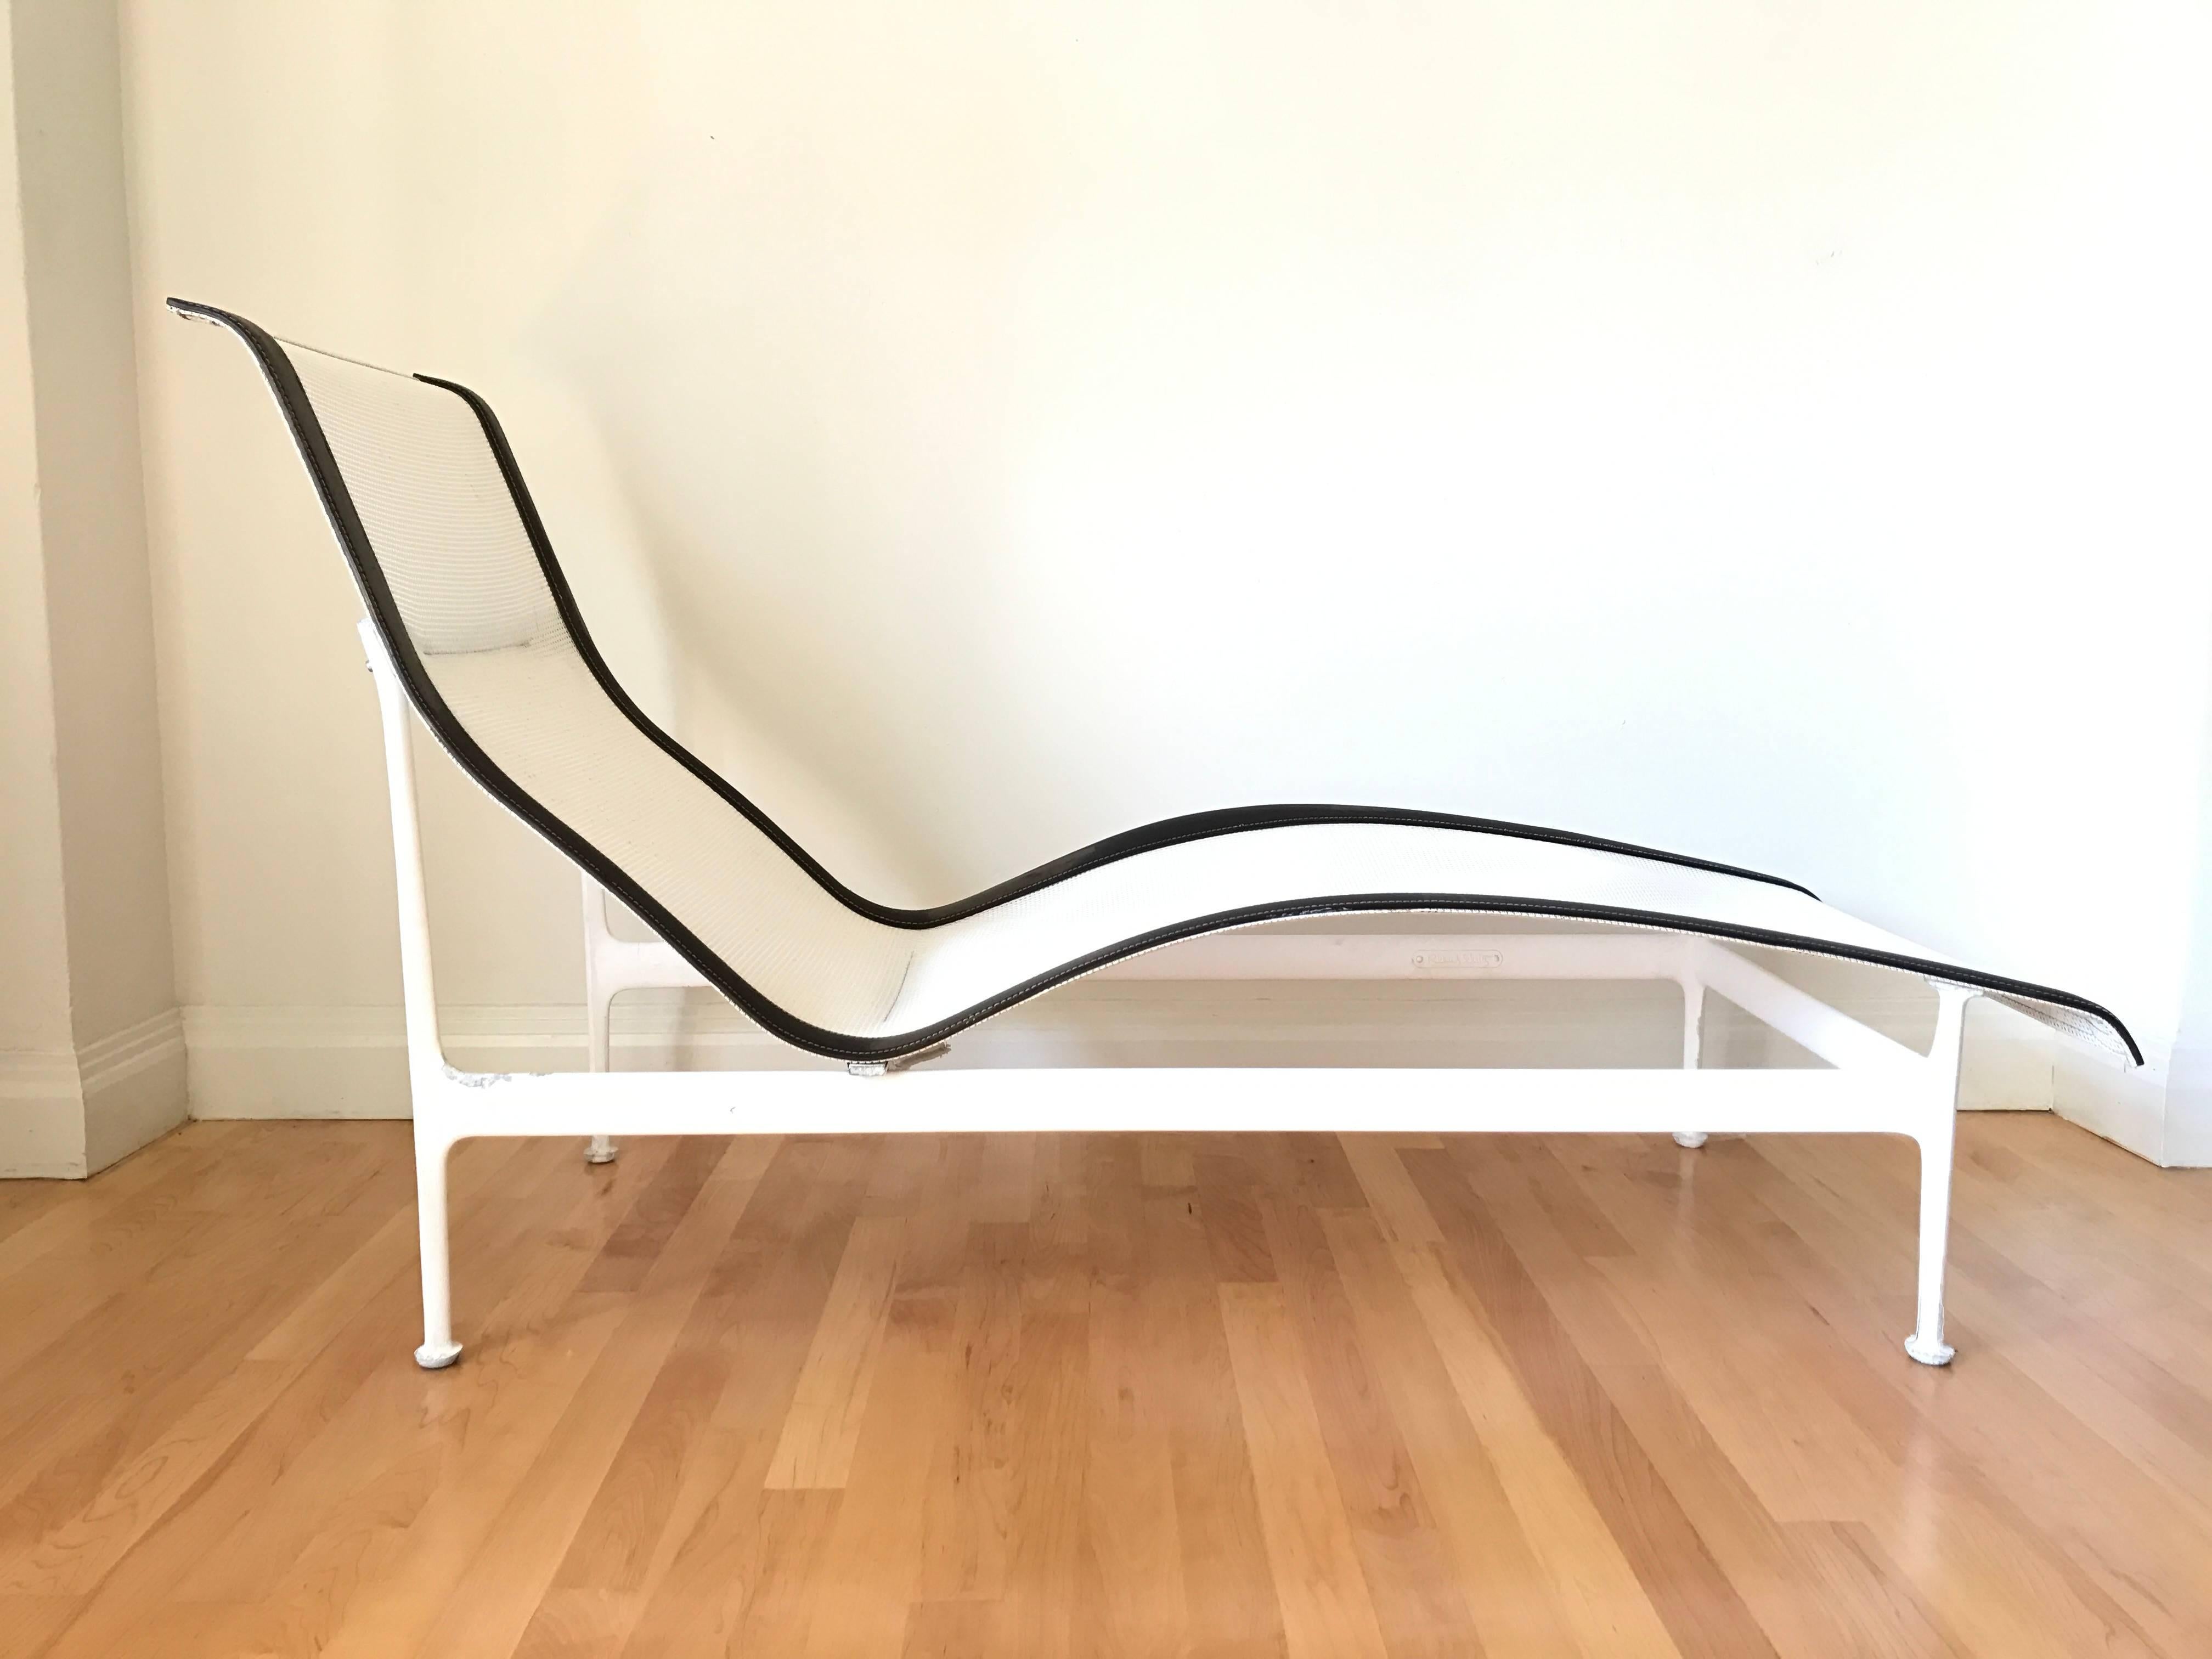 Original Leisure collection powder coated aluminum chaise longue by Richard Schultz for Knoll.